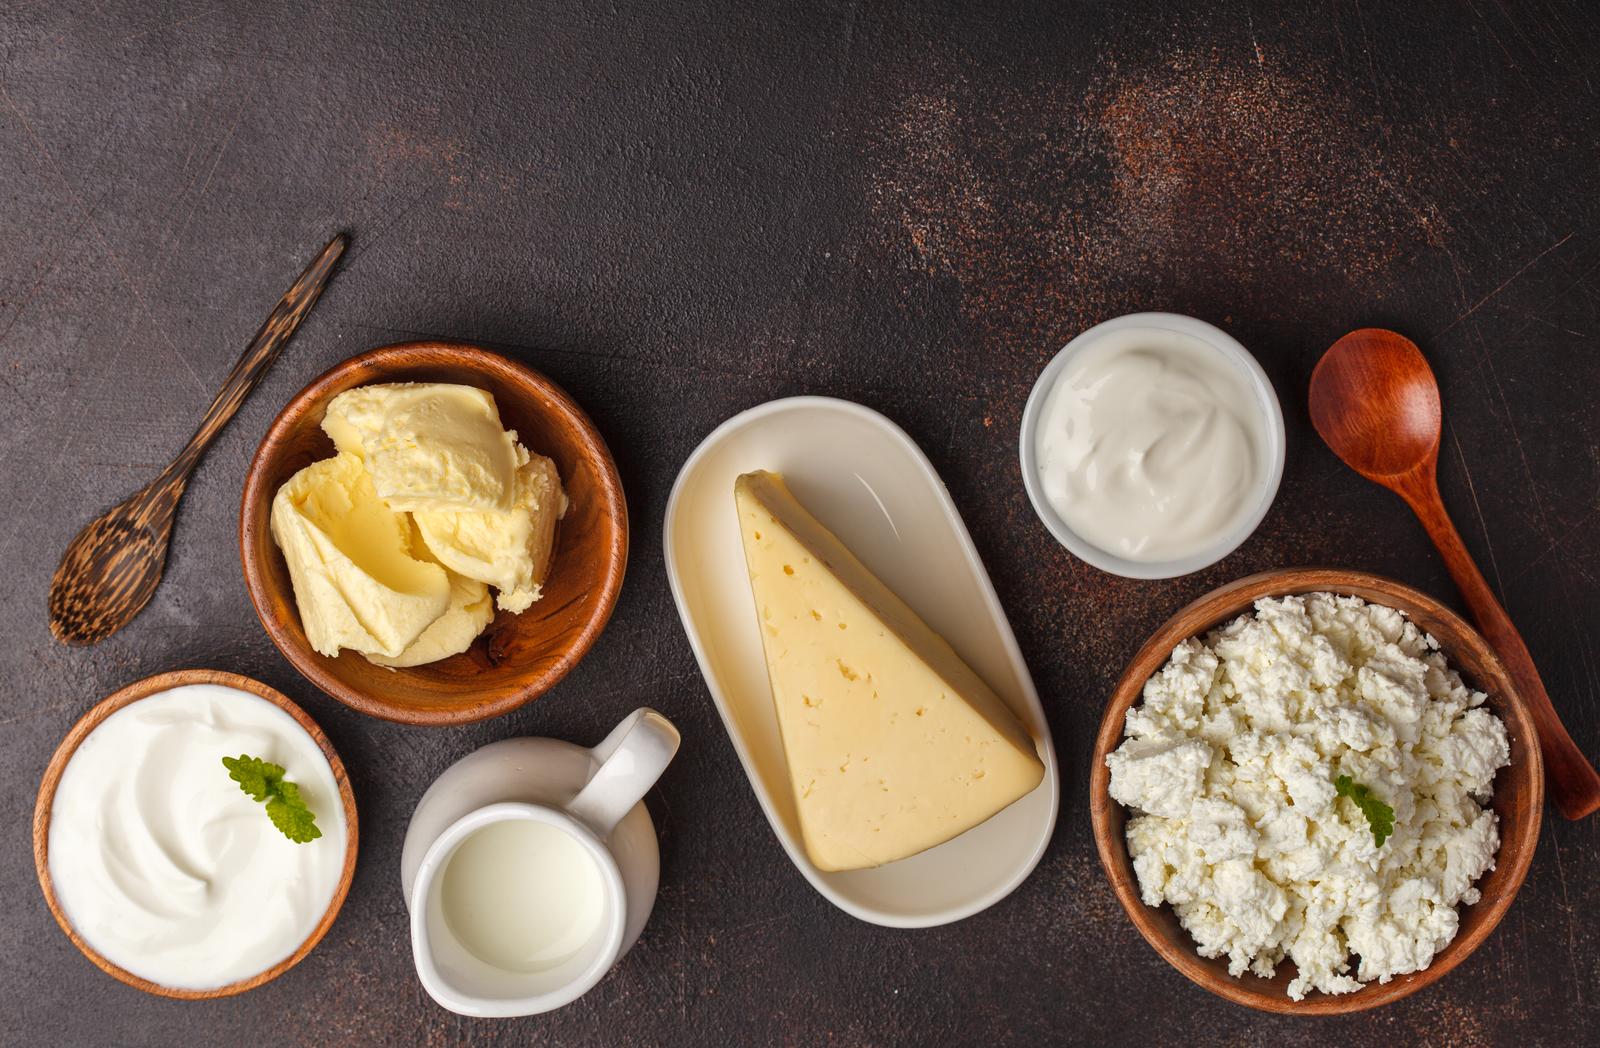 MEDVIC GRUPP AS - Manufacture of cheese and curd in Estonia